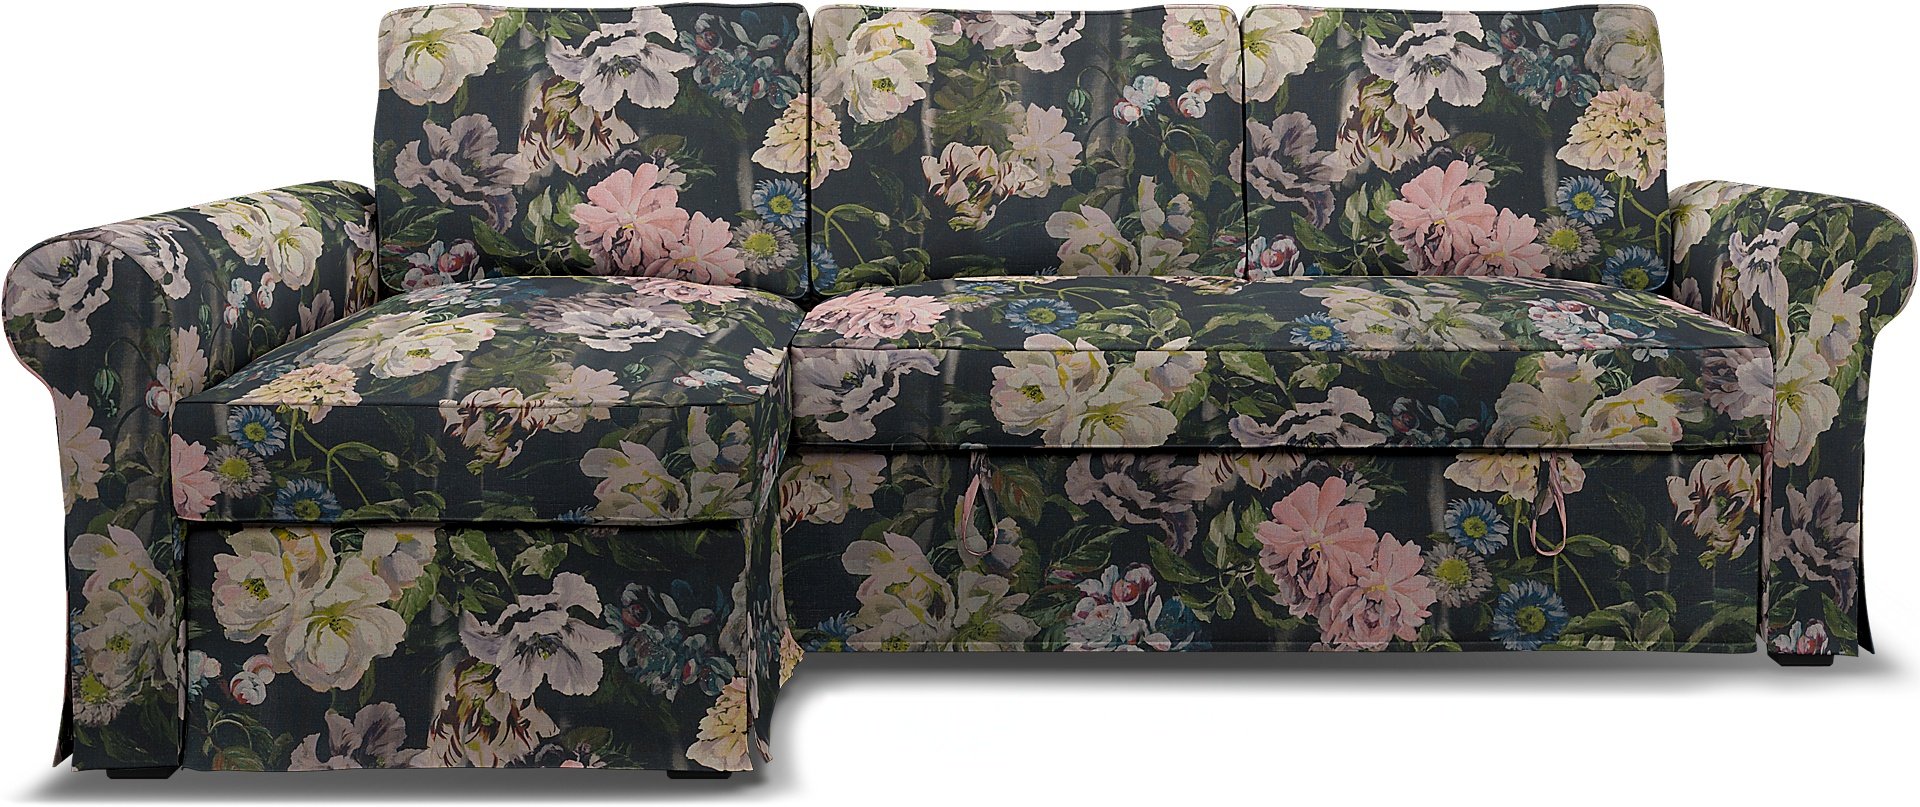 IKEA - Backabro Sofabed with Chaise Cover, Delft Flower - Graphite, Linen - Bemz